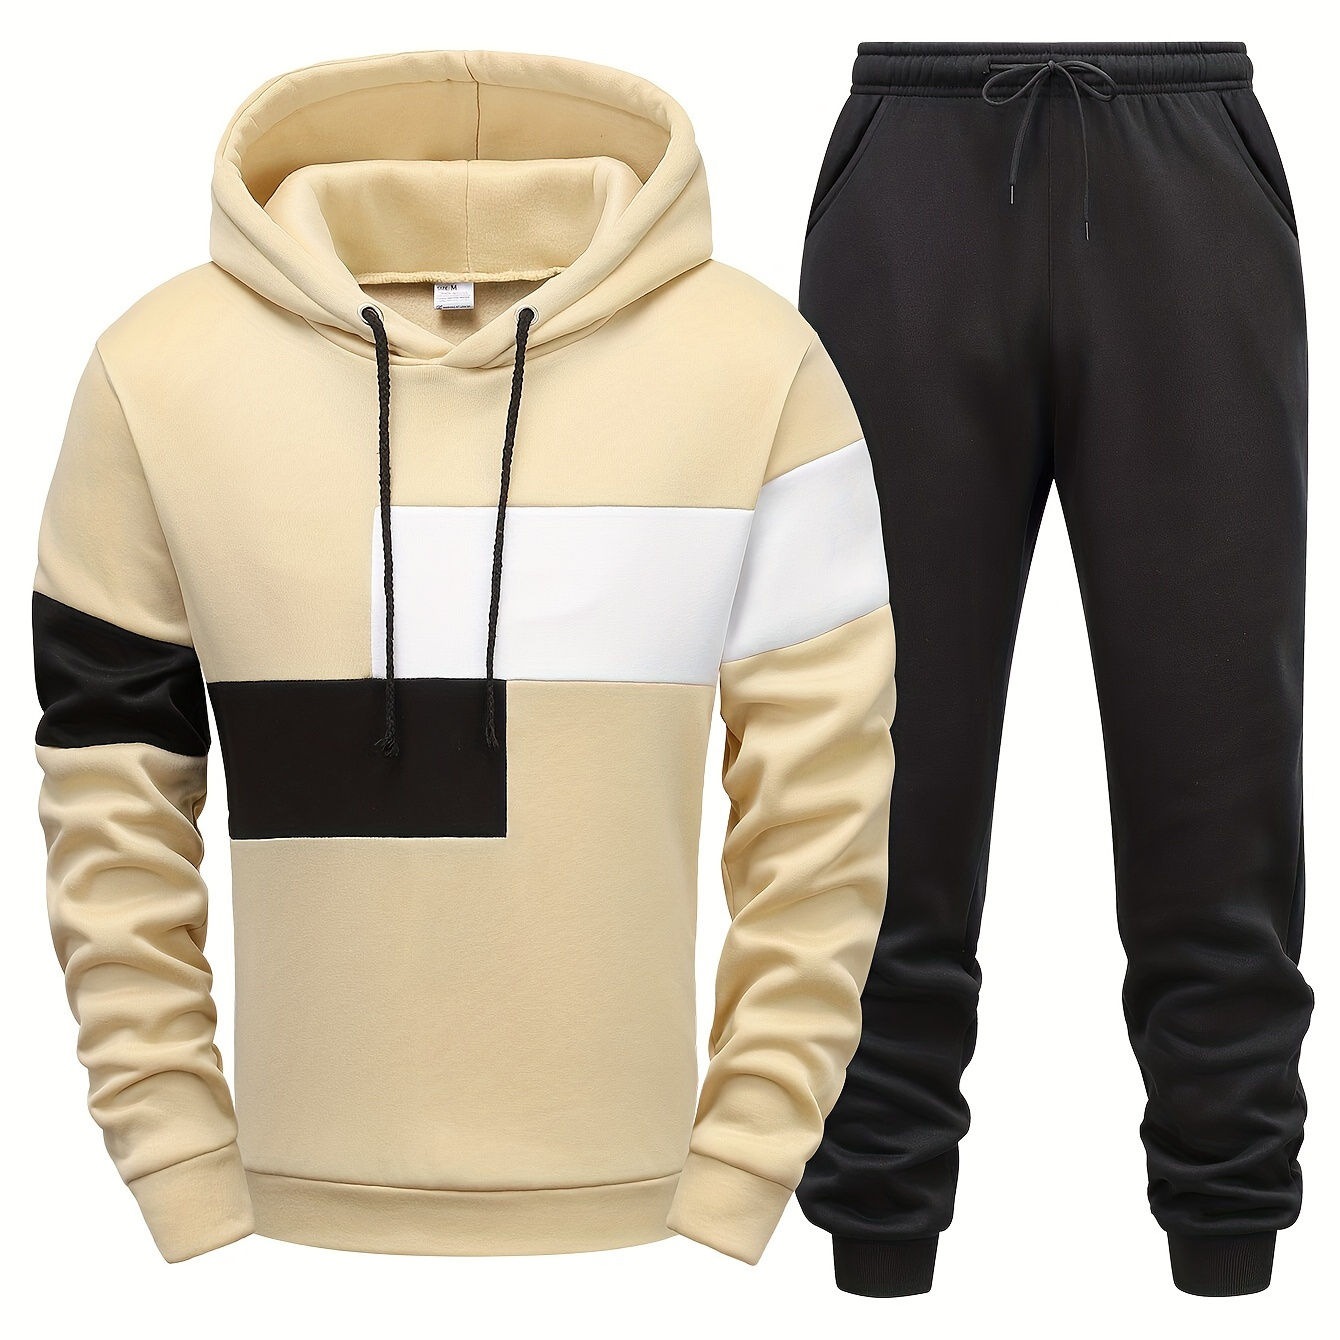 

2-piece Men's Spring Fall Sports Outfit Set, Men's Color Blocked Long Sleeve Hooded Sweatshirt & Solid Drawstring Sweatpants Set